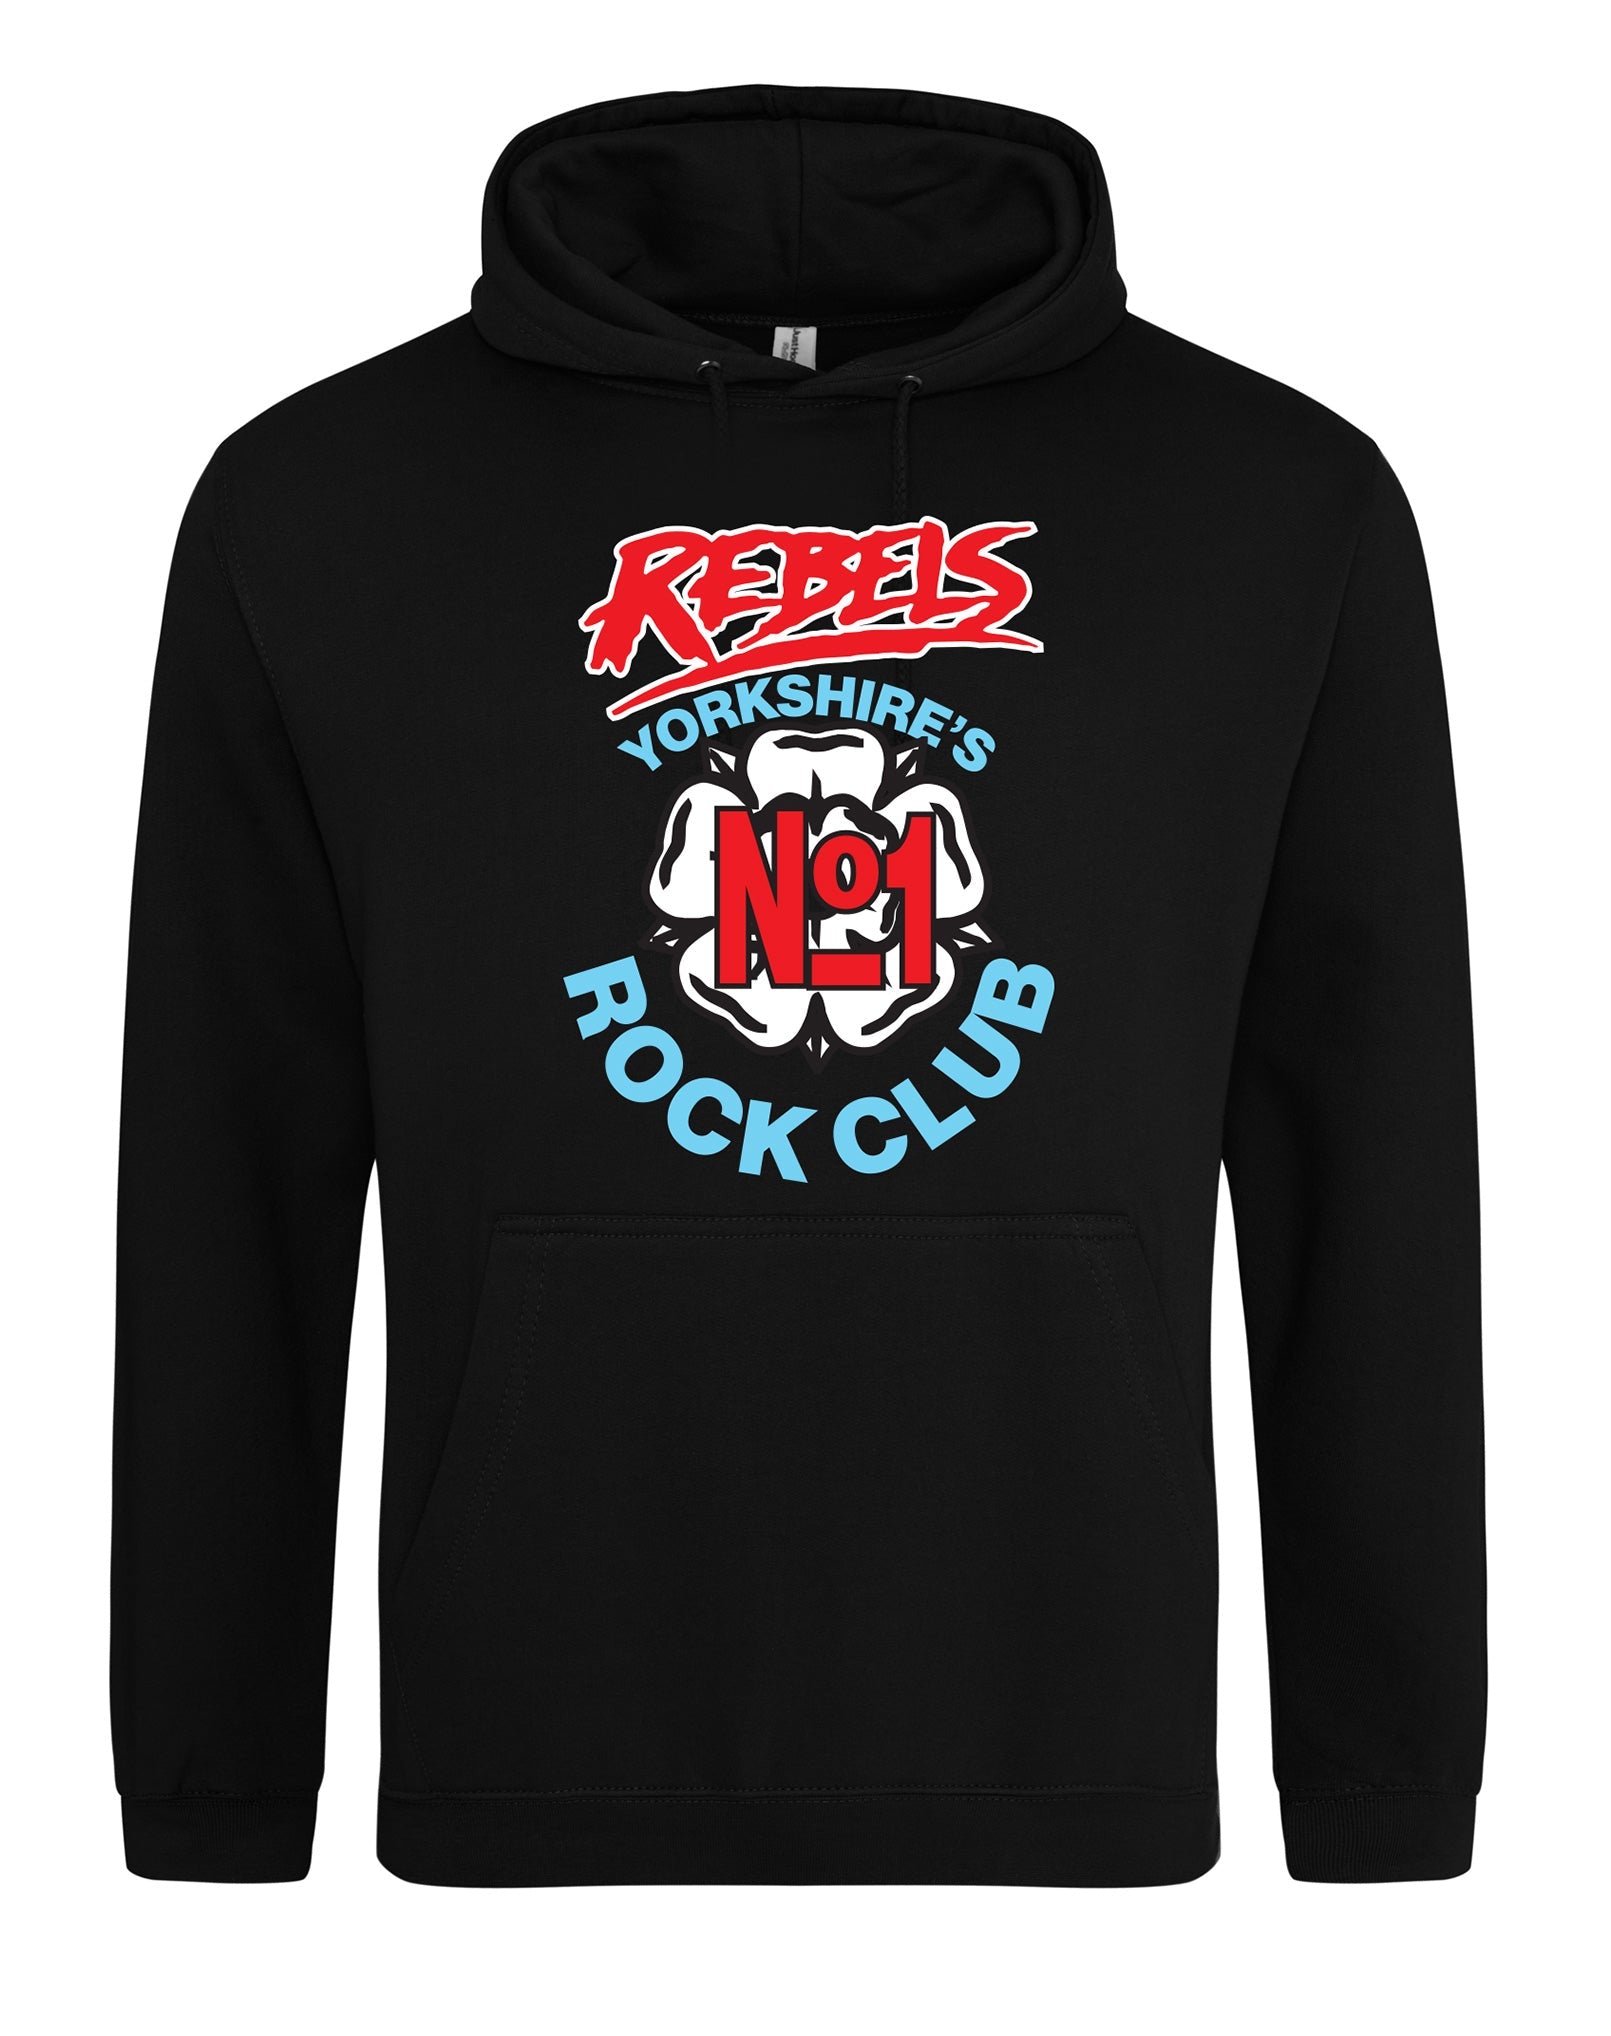 Rebels No. 1 rock club unisex fit hoodie - various colours - Dirty Stop Outs